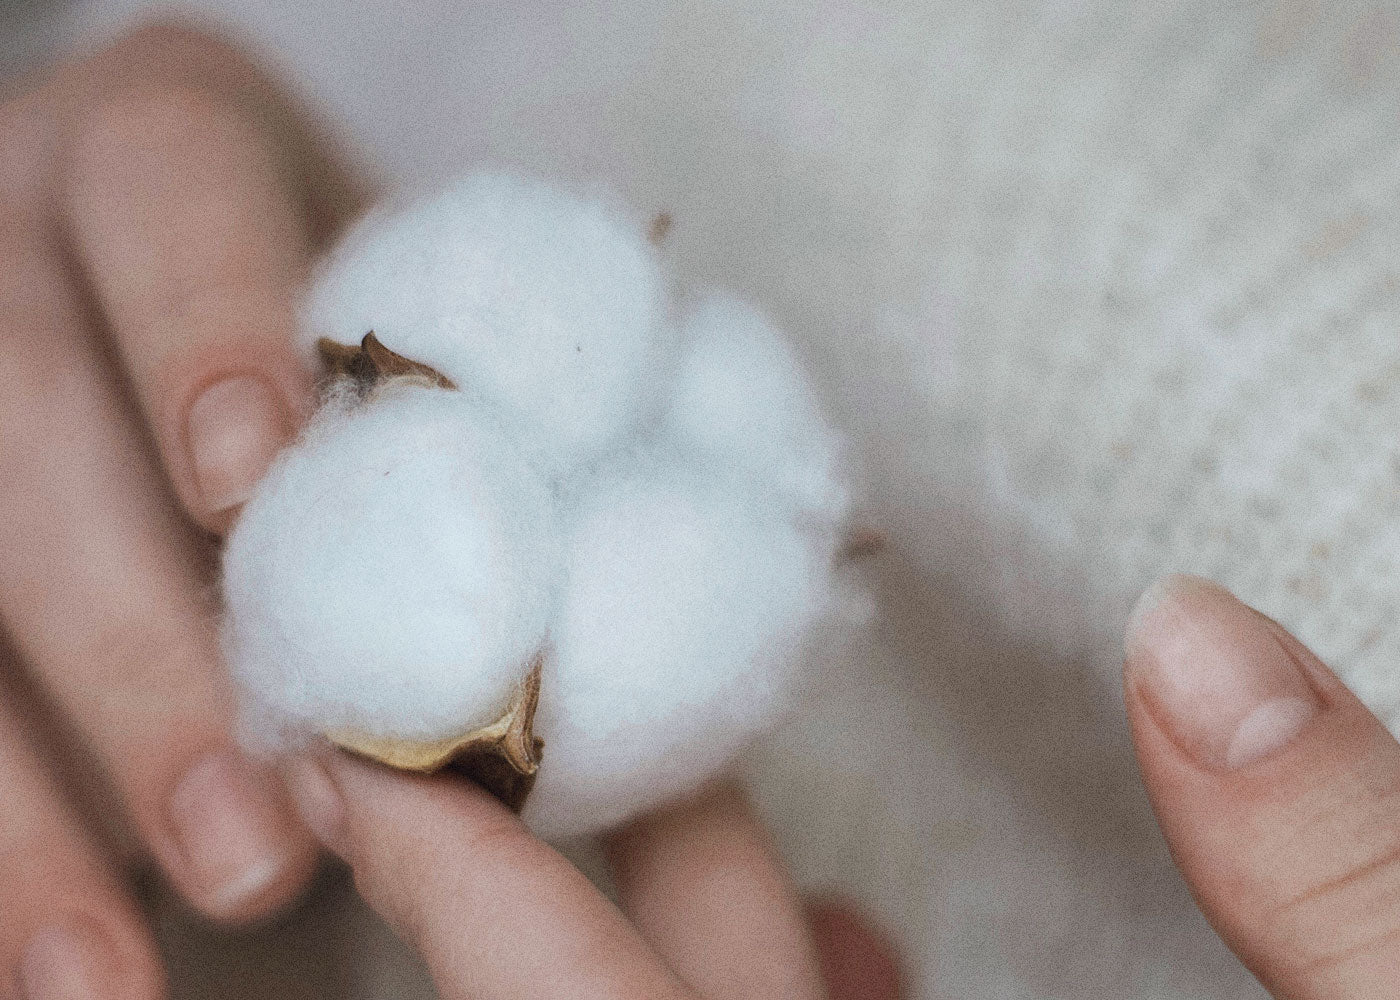 Raw Cotton - Superior for Pillows, Craft, Vapes, Stuffing Dolls